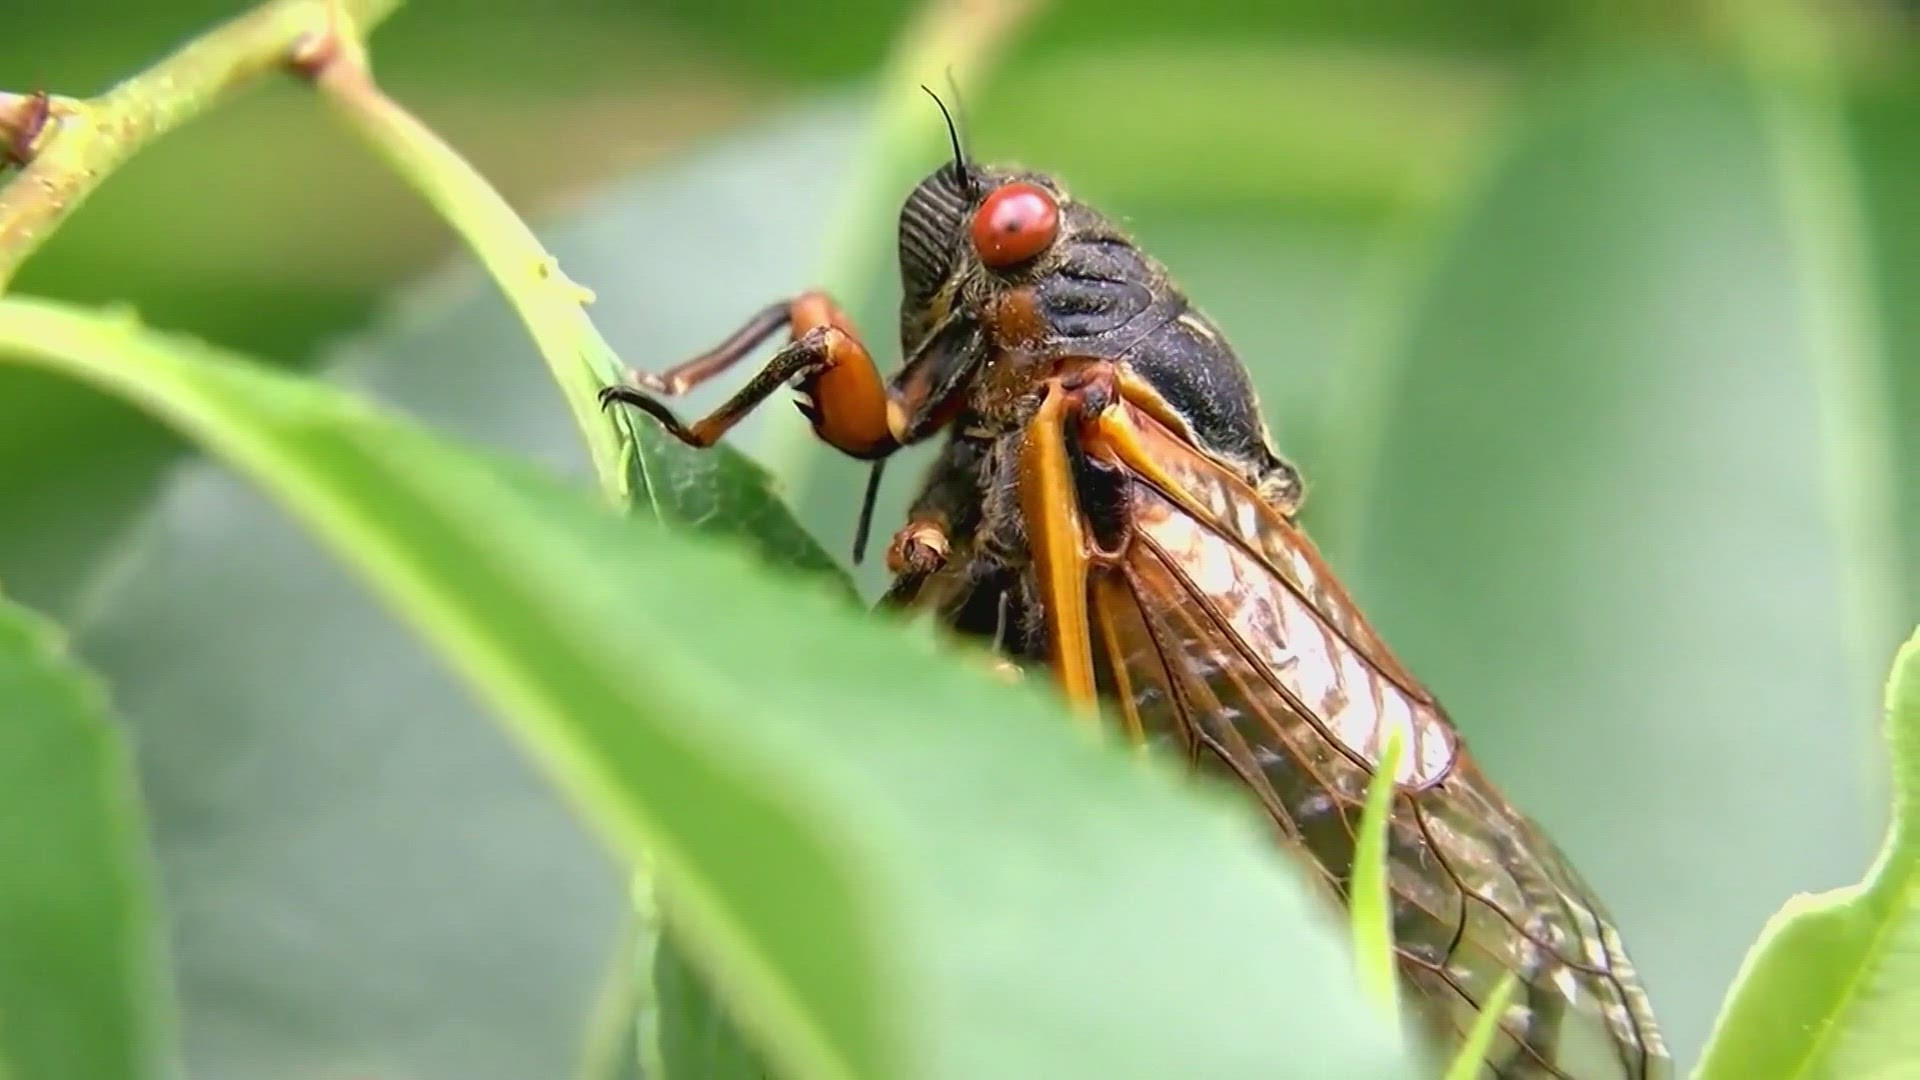 According to experts, some trillion cicadas will start appearing in May and live for about six weeks as part of a dual emergence.